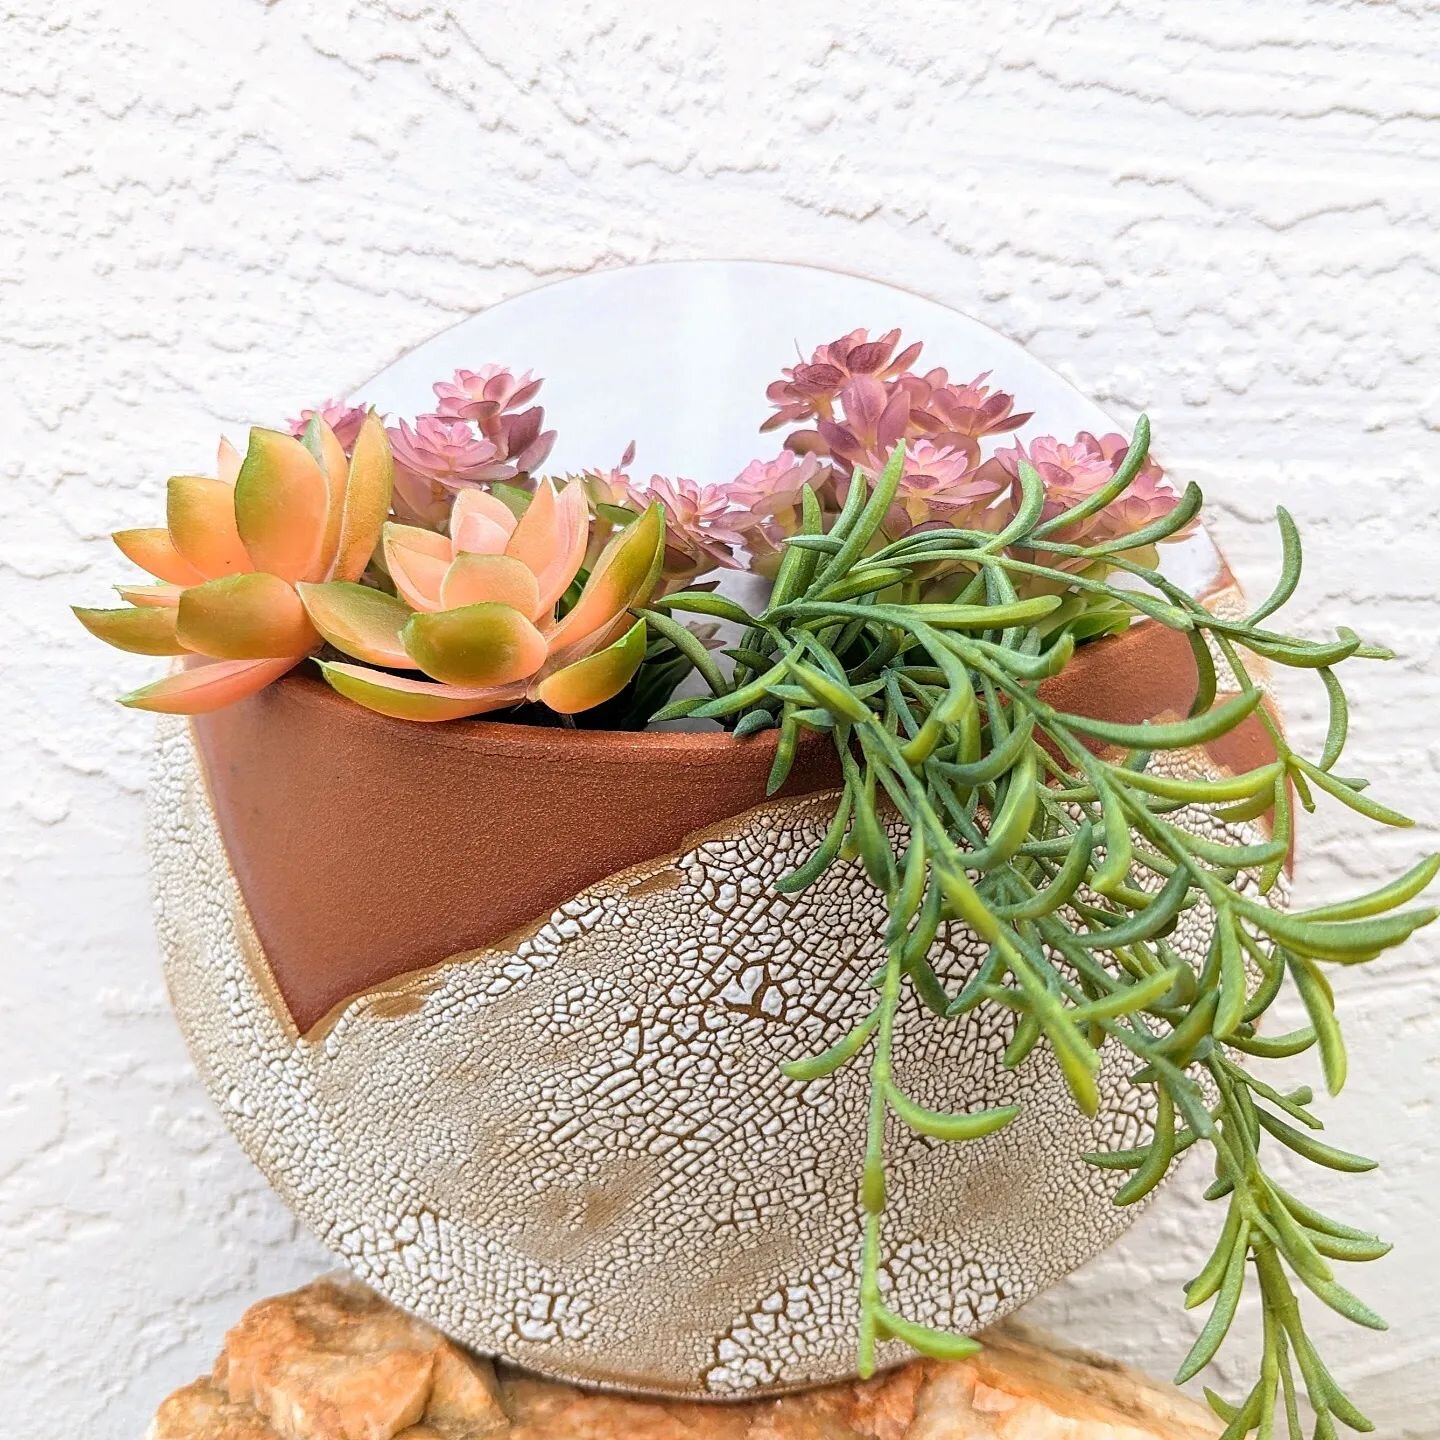 I've been wanting to try this wall pocket with a textured glaze for a while now. I really love how the glaze looks like lichen. It's going to be hard not to keep this one for myself, but alas, it's posted now in the new shop! 🌱 

Calderaclay.com